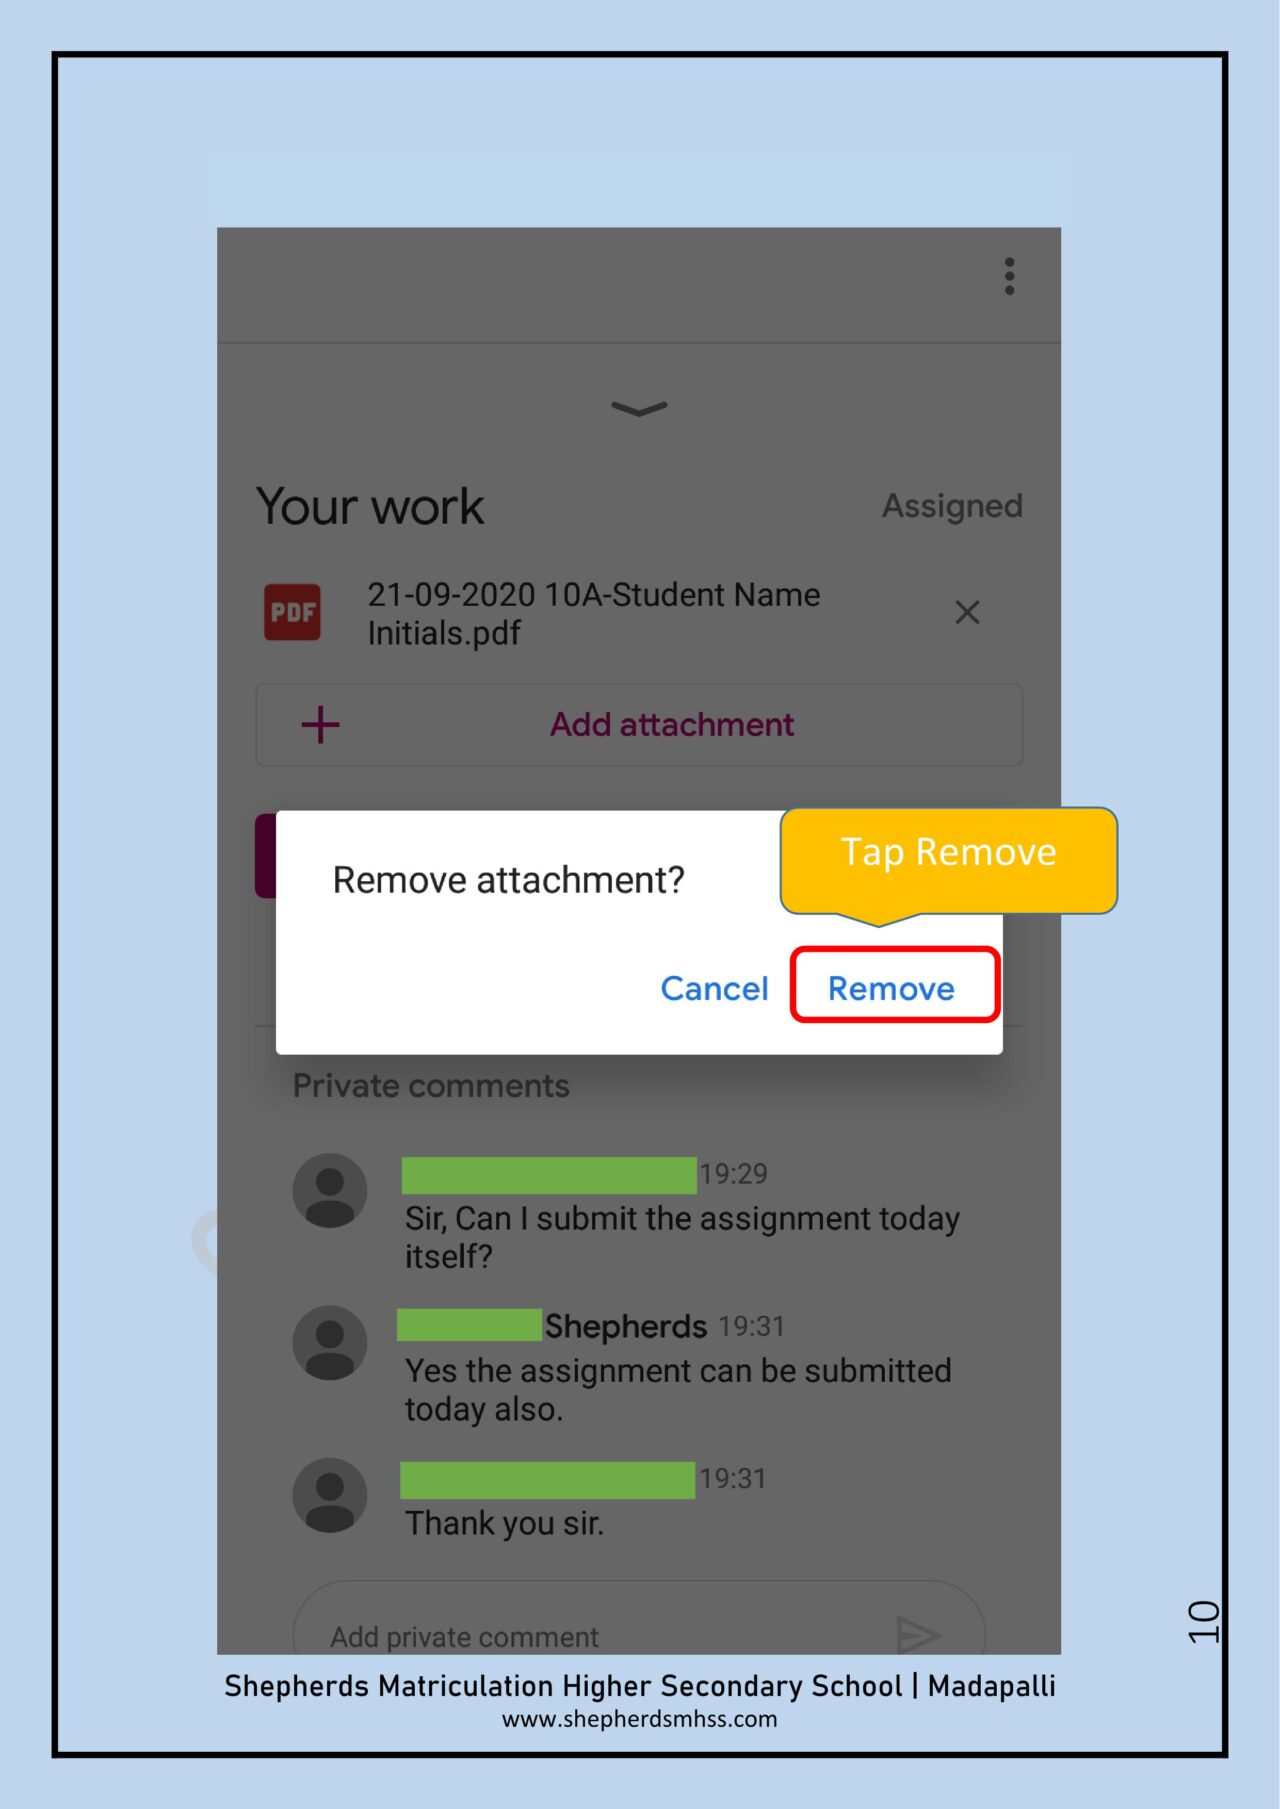 resubmit assignment in google classroom